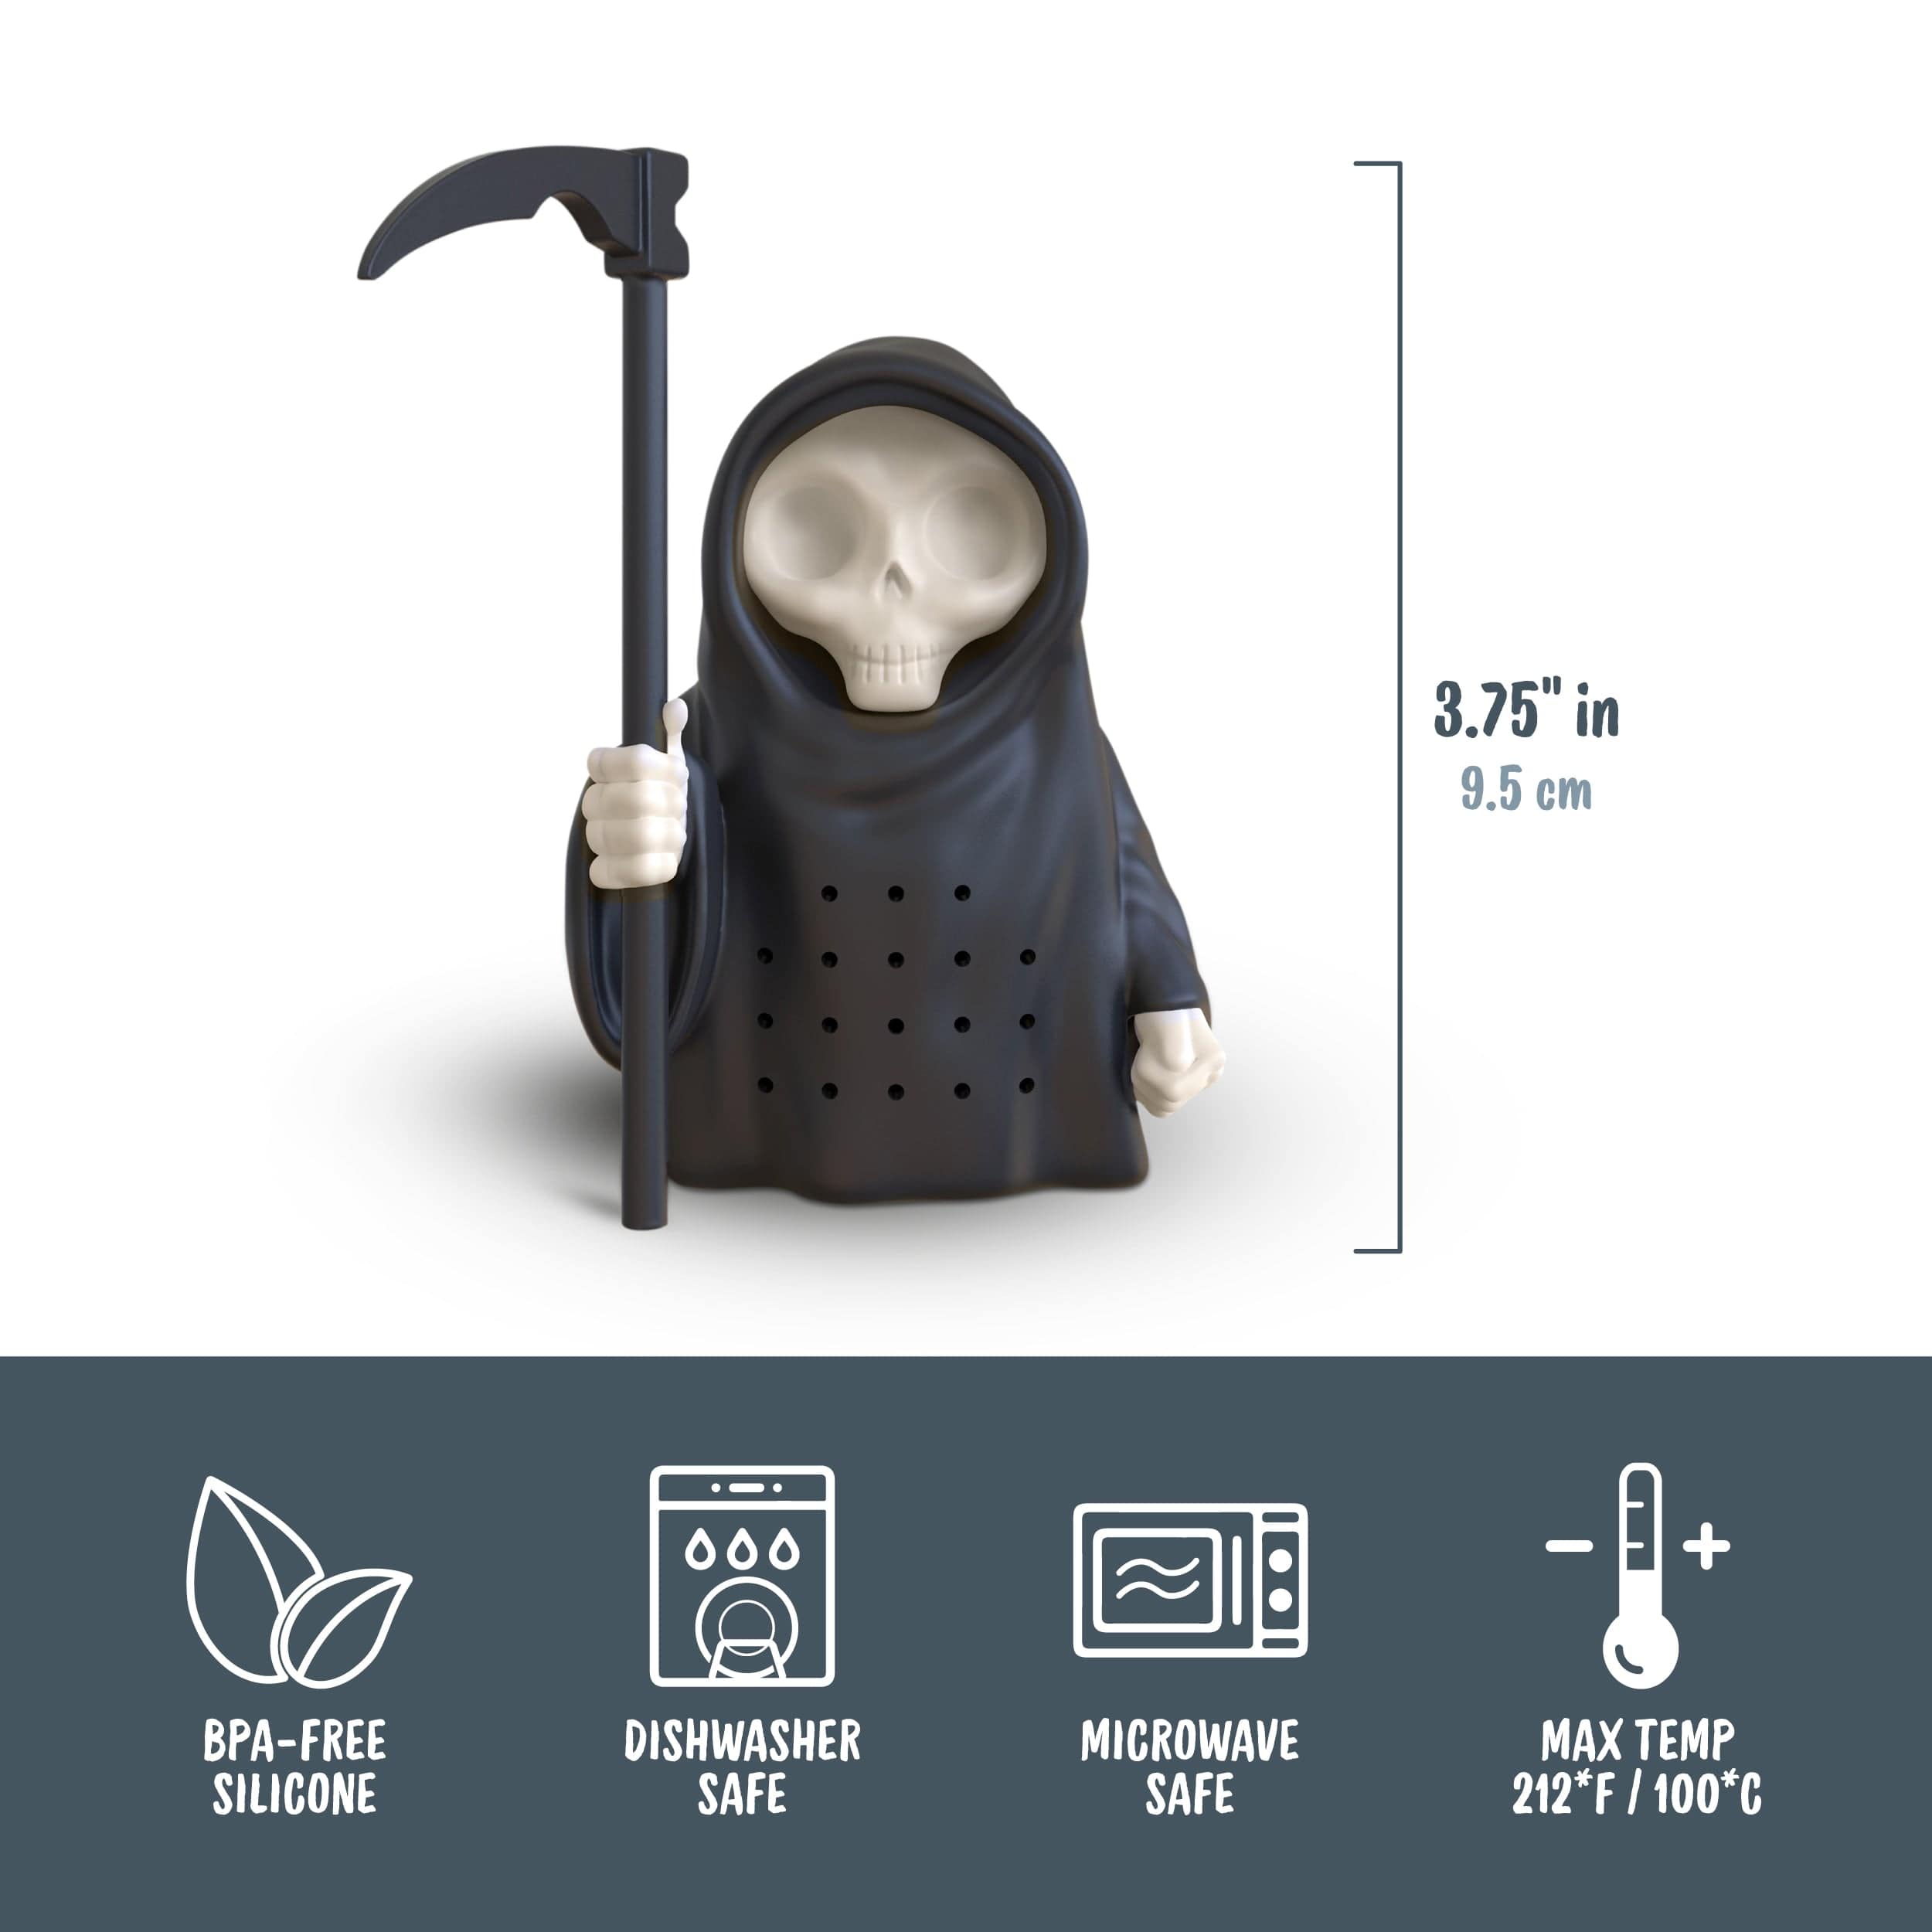 Grim Steeper Tea Infuser. 3.75 inches tall. BPA-Free Silicone. Dishwasher & Microwave safe. Max temp 212 degrees F